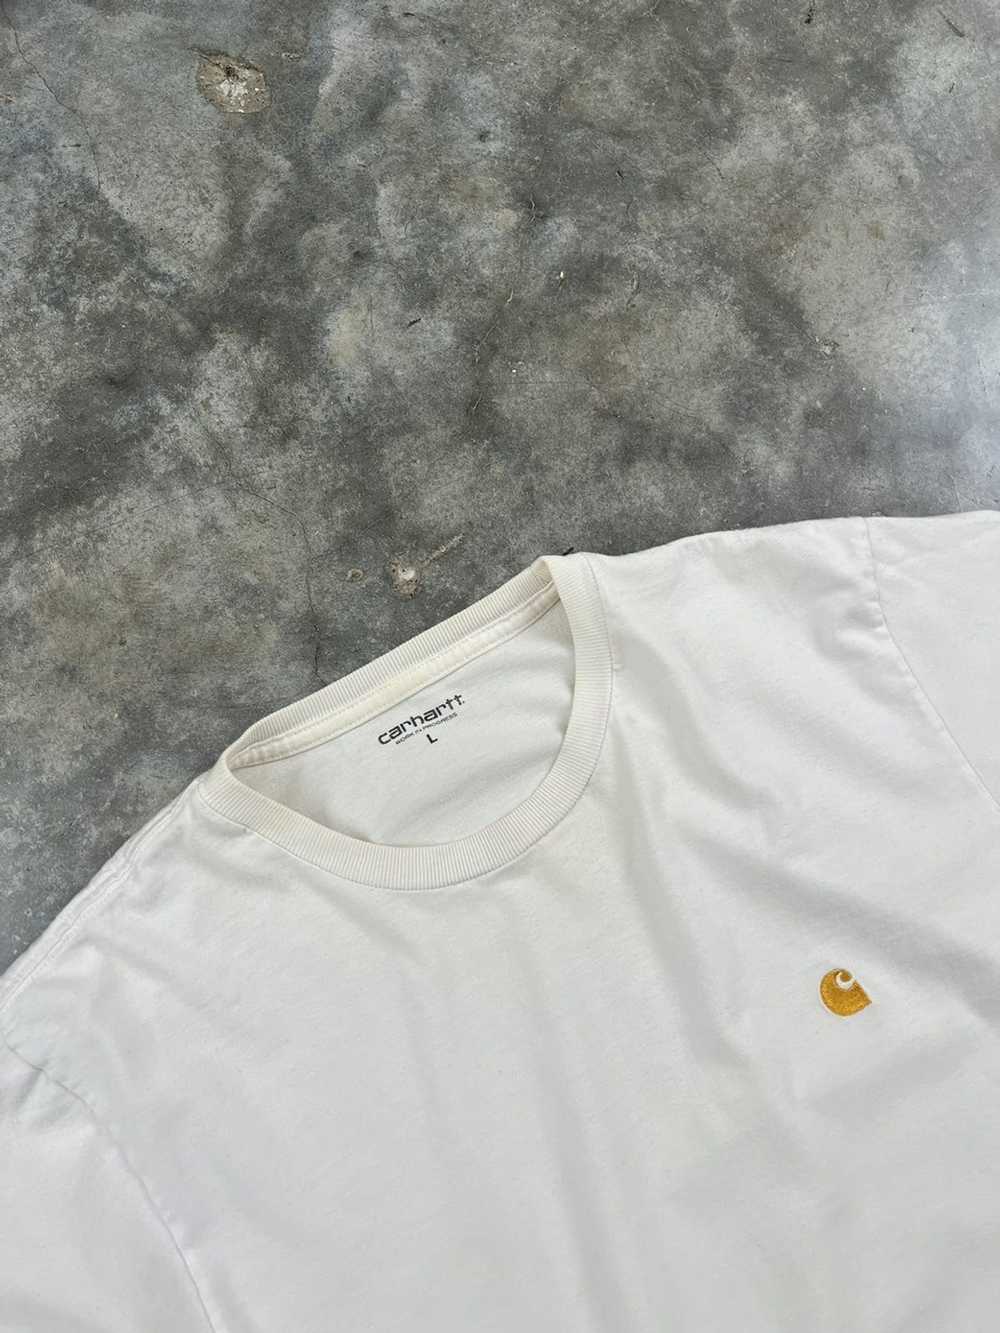 Carhartt Wip Carhartt W.I.P Active Chase Tee Whit… - image 2